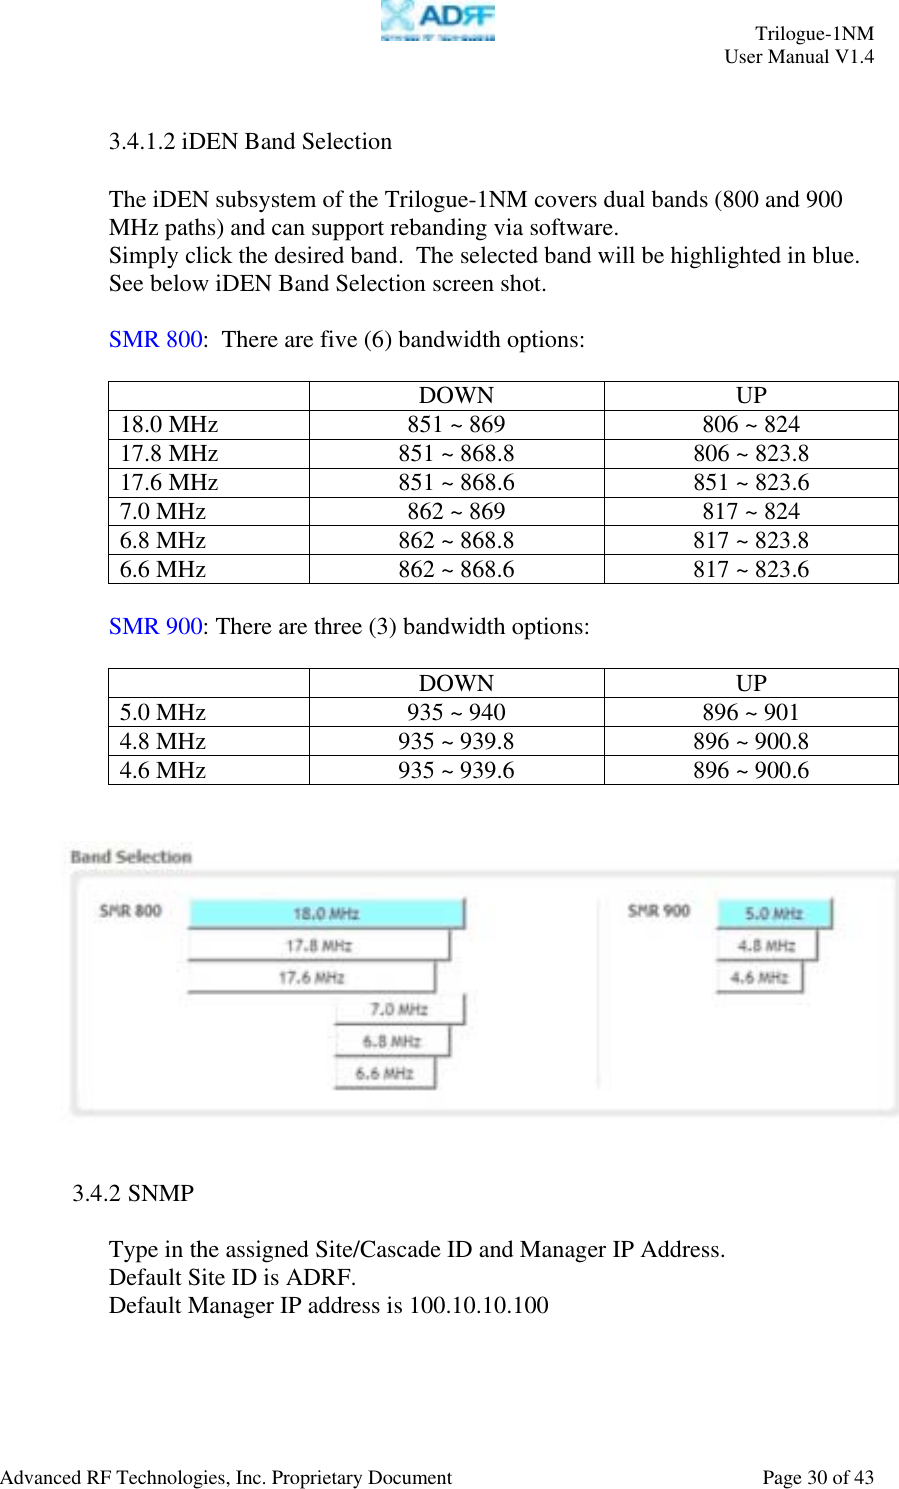     Trilogue-1NM User Manual V1.4  Advanced RF Technologies, Inc. Proprietary Document  Page 30 of 43  3.4.1.2 iDEN Band Selection  The iDEN subsystem of the Trilogue-1NM covers dual bands (800 and 900 MHz paths) and can support rebanding via software. Simply click the desired band.  The selected band will be highlighted in blue.  See below iDEN Band Selection screen shot.  SMR 800:  There are five (6) bandwidth options:   DOWN UP 18.0 MHz  851 ~ 869  806 ~ 824 17.8 MHz  851 ~ 868.8  806 ~ 823.8 17.6 MHz  851 ~ 868.6  851 ~ 823.6 7.0 MHz  862 ~ 869  817 ~ 824 6.8 MHz  862 ~ 868.8  817 ~ 823.8 6.6 MHz  862 ~ 868.6  817 ~ 823.6  SMR 900: There are three (3) bandwidth options:   DOWN UP 5.0 MHz  935 ~ 940  896 ~ 901 4.8 MHz  935 ~ 939.8  896 ~ 900.8 4.6 MHz  935 ~ 939.6  896 ~ 900.6      3.4.2 SNMP  Type in the assigned Site/Cascade ID and Manager IP Address.  Default Site ID is ADRF. Default Manager IP address is 100.10.10.100  